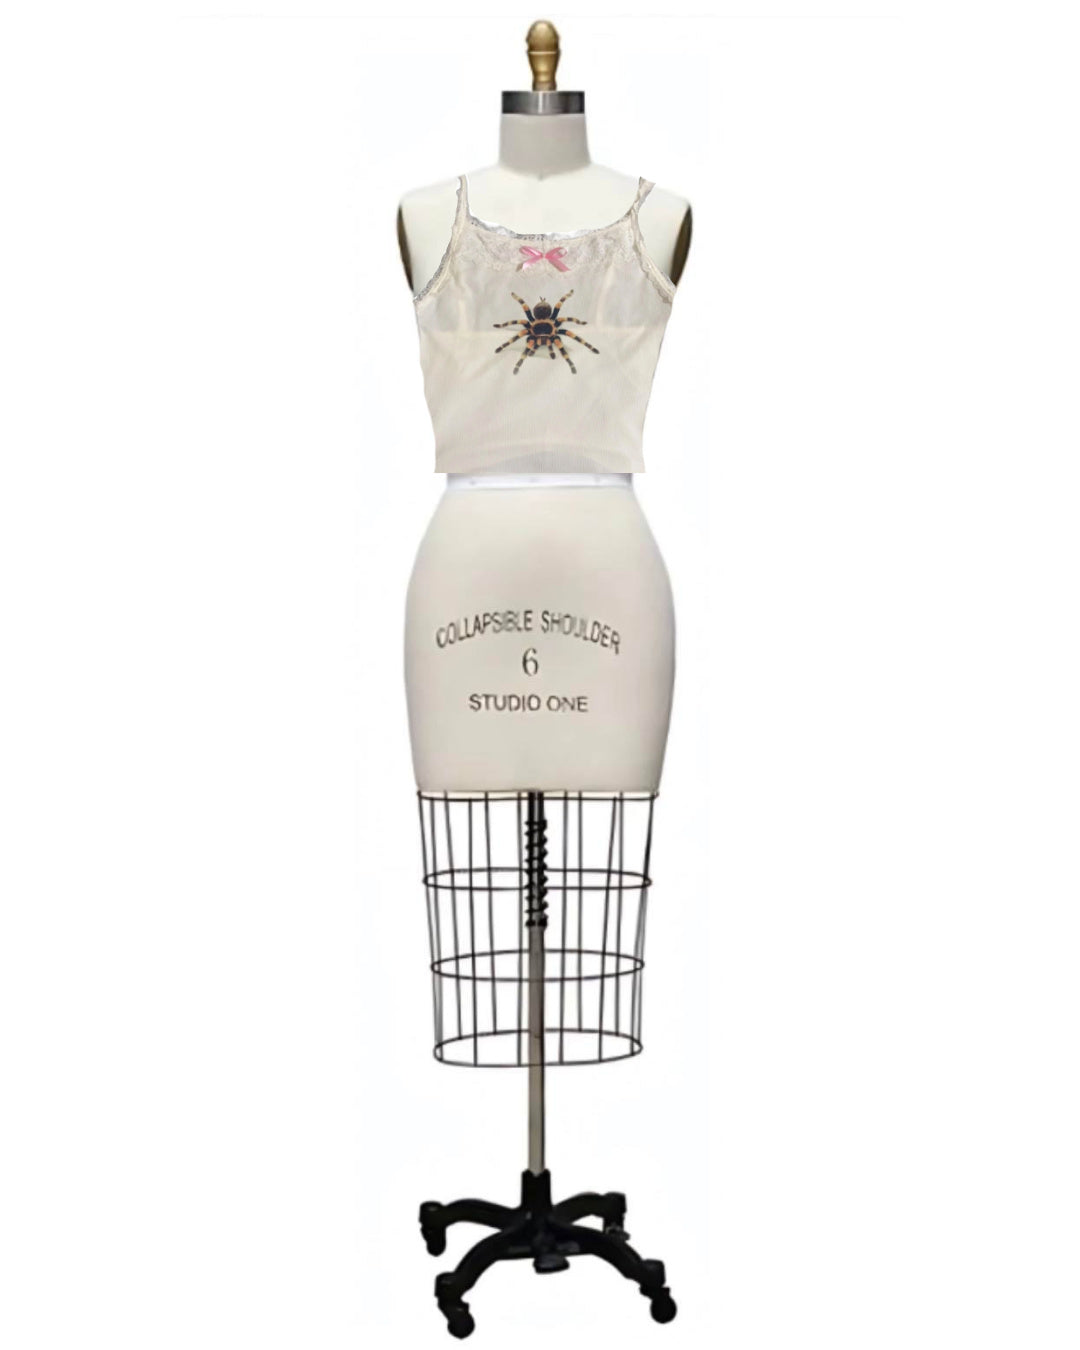 Tarantula- the Spider Print Lace Trimmed Camisole